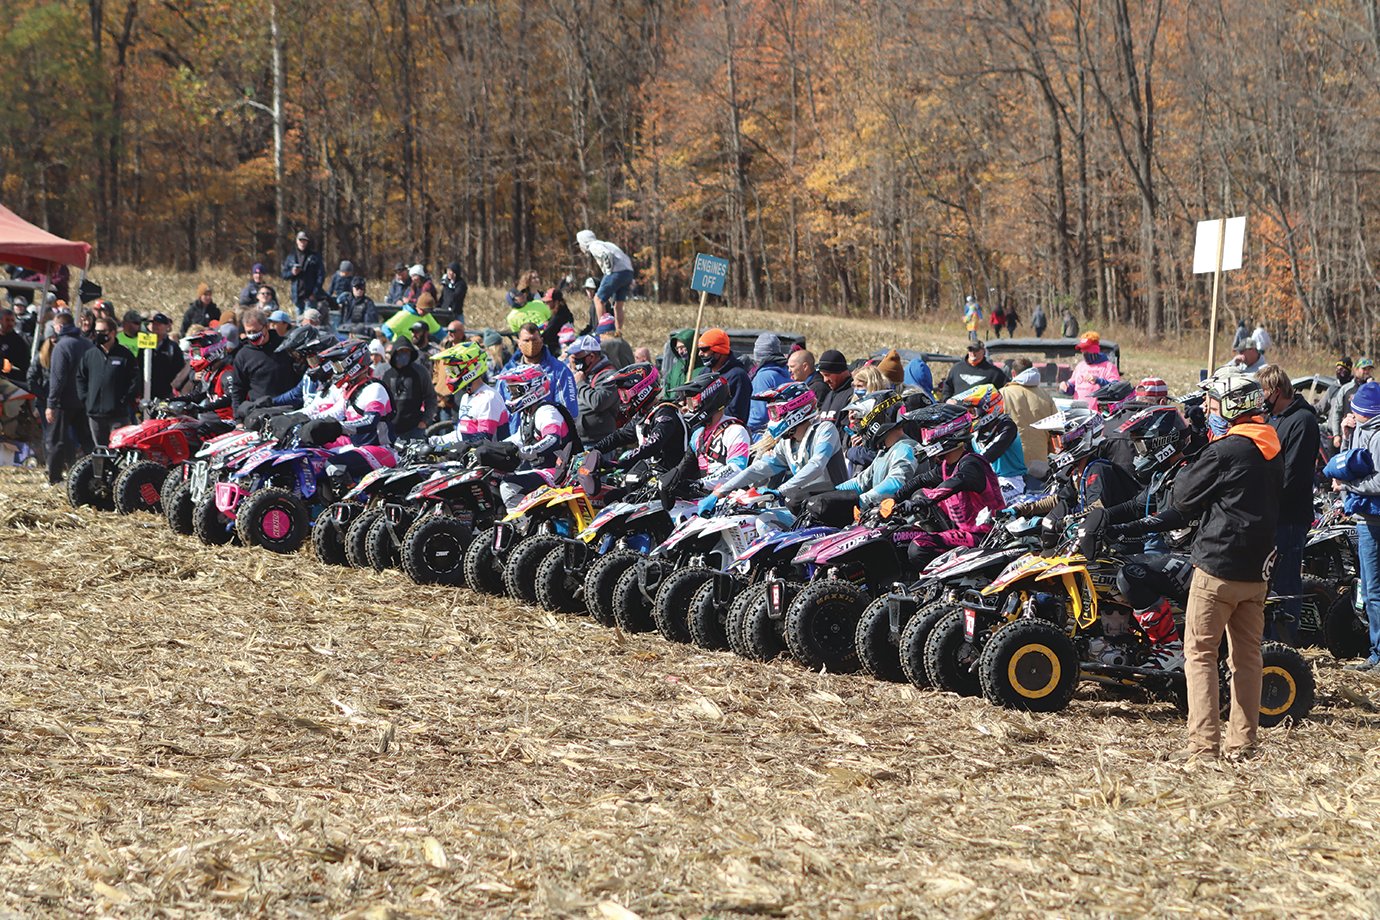 Racers in the first wave of GNCC's Ironman race at Tom's Marine prepare for the starting announcement Saturday for an estimated 20,000 fans.